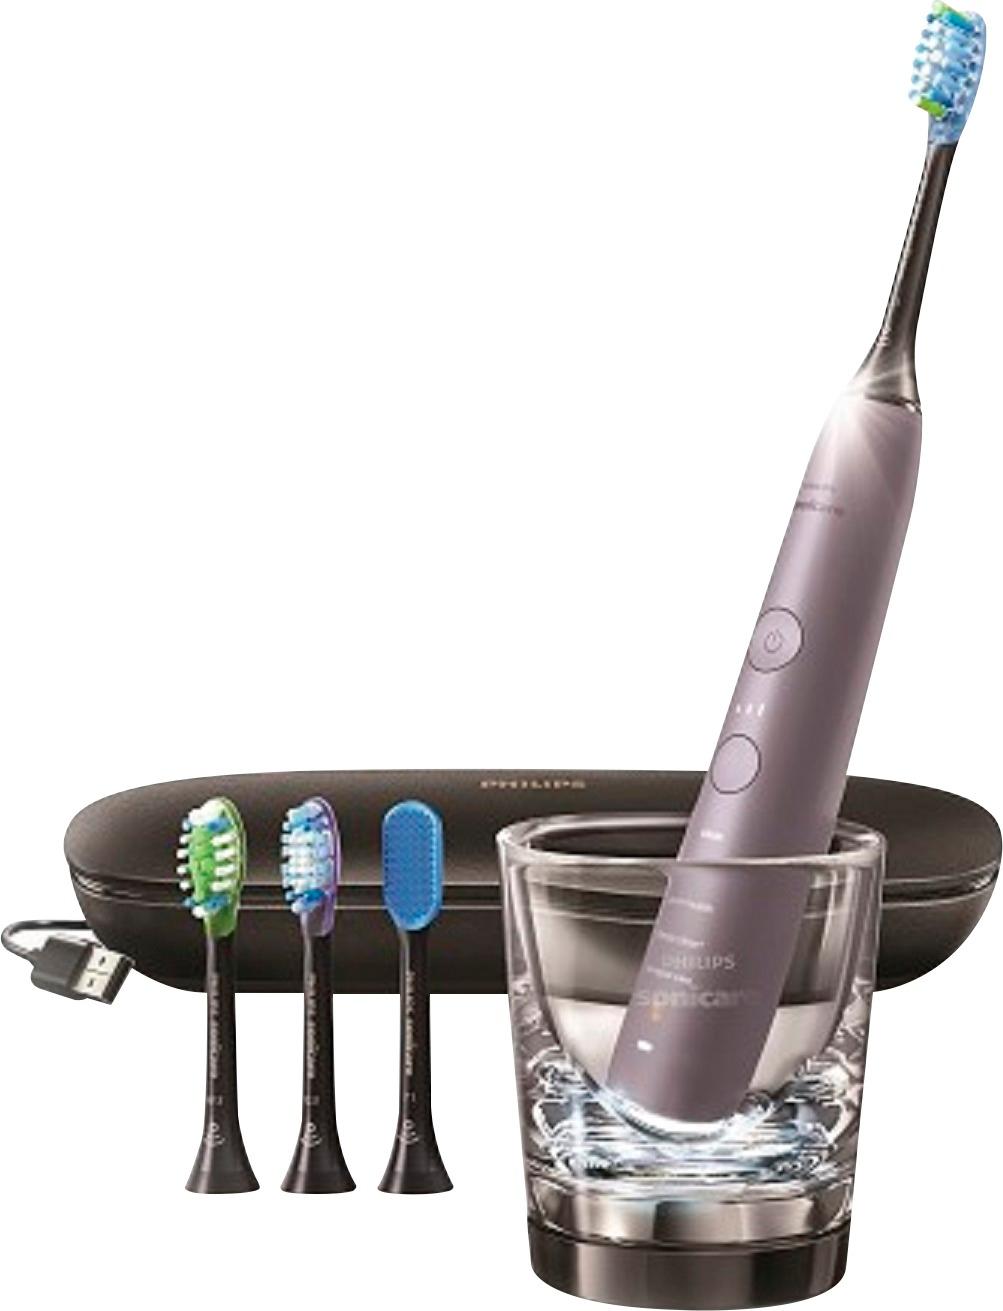 philips-sonicare-diamondclean-smart-9500-rechargeable-toothbrush-silver